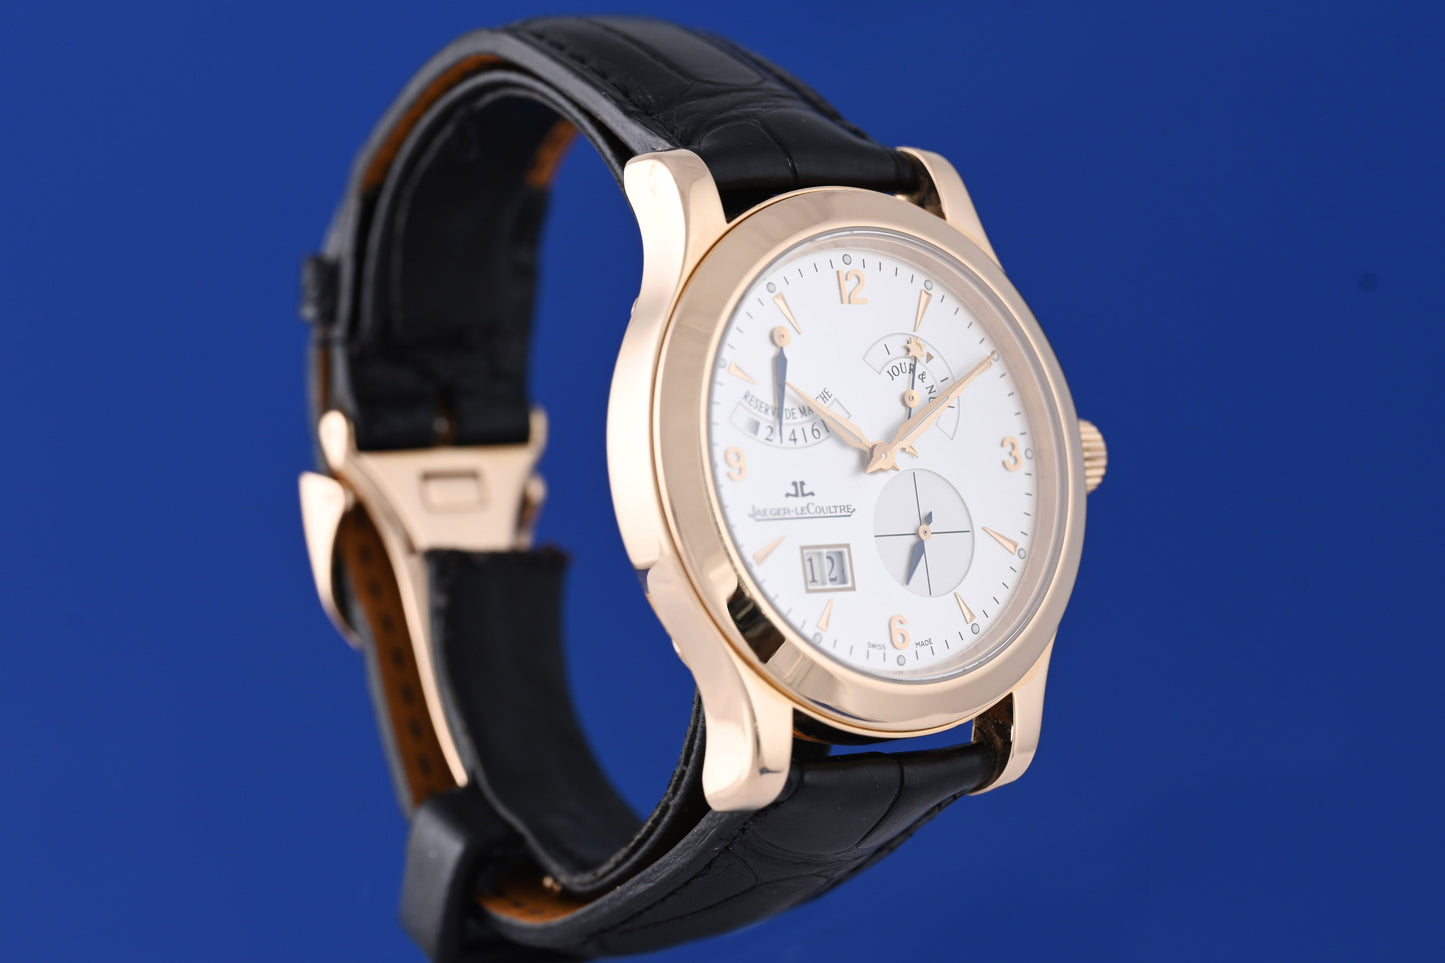 Jaeger-LeCoultre Master Control 8 Days Big Date 146.2.17 - rose gold